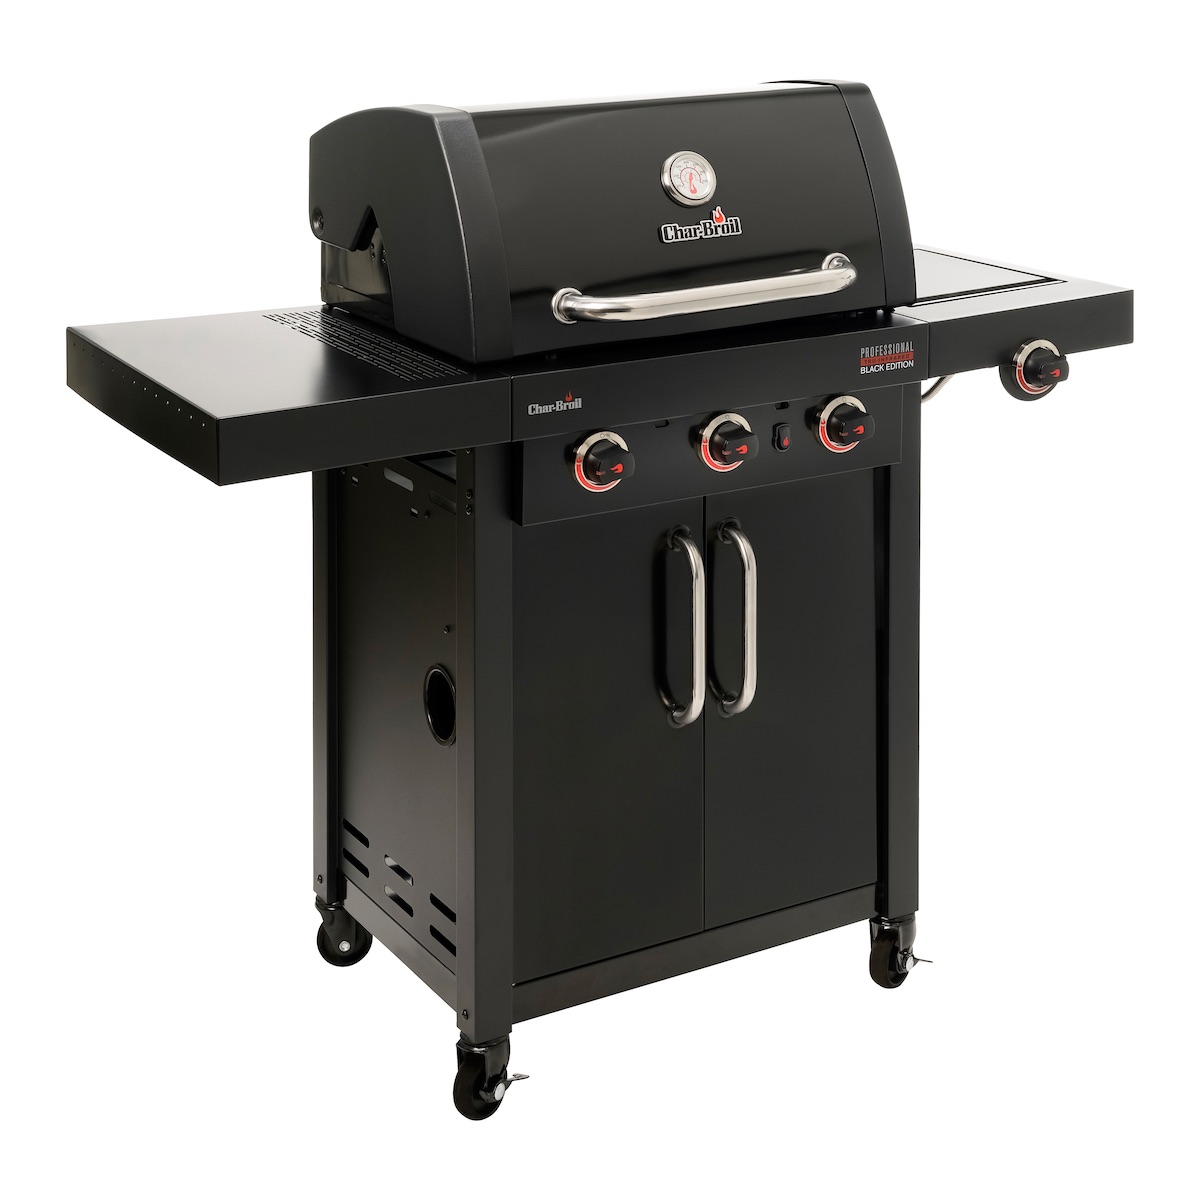 CHAR-BROIL Professional Black Edition 3500